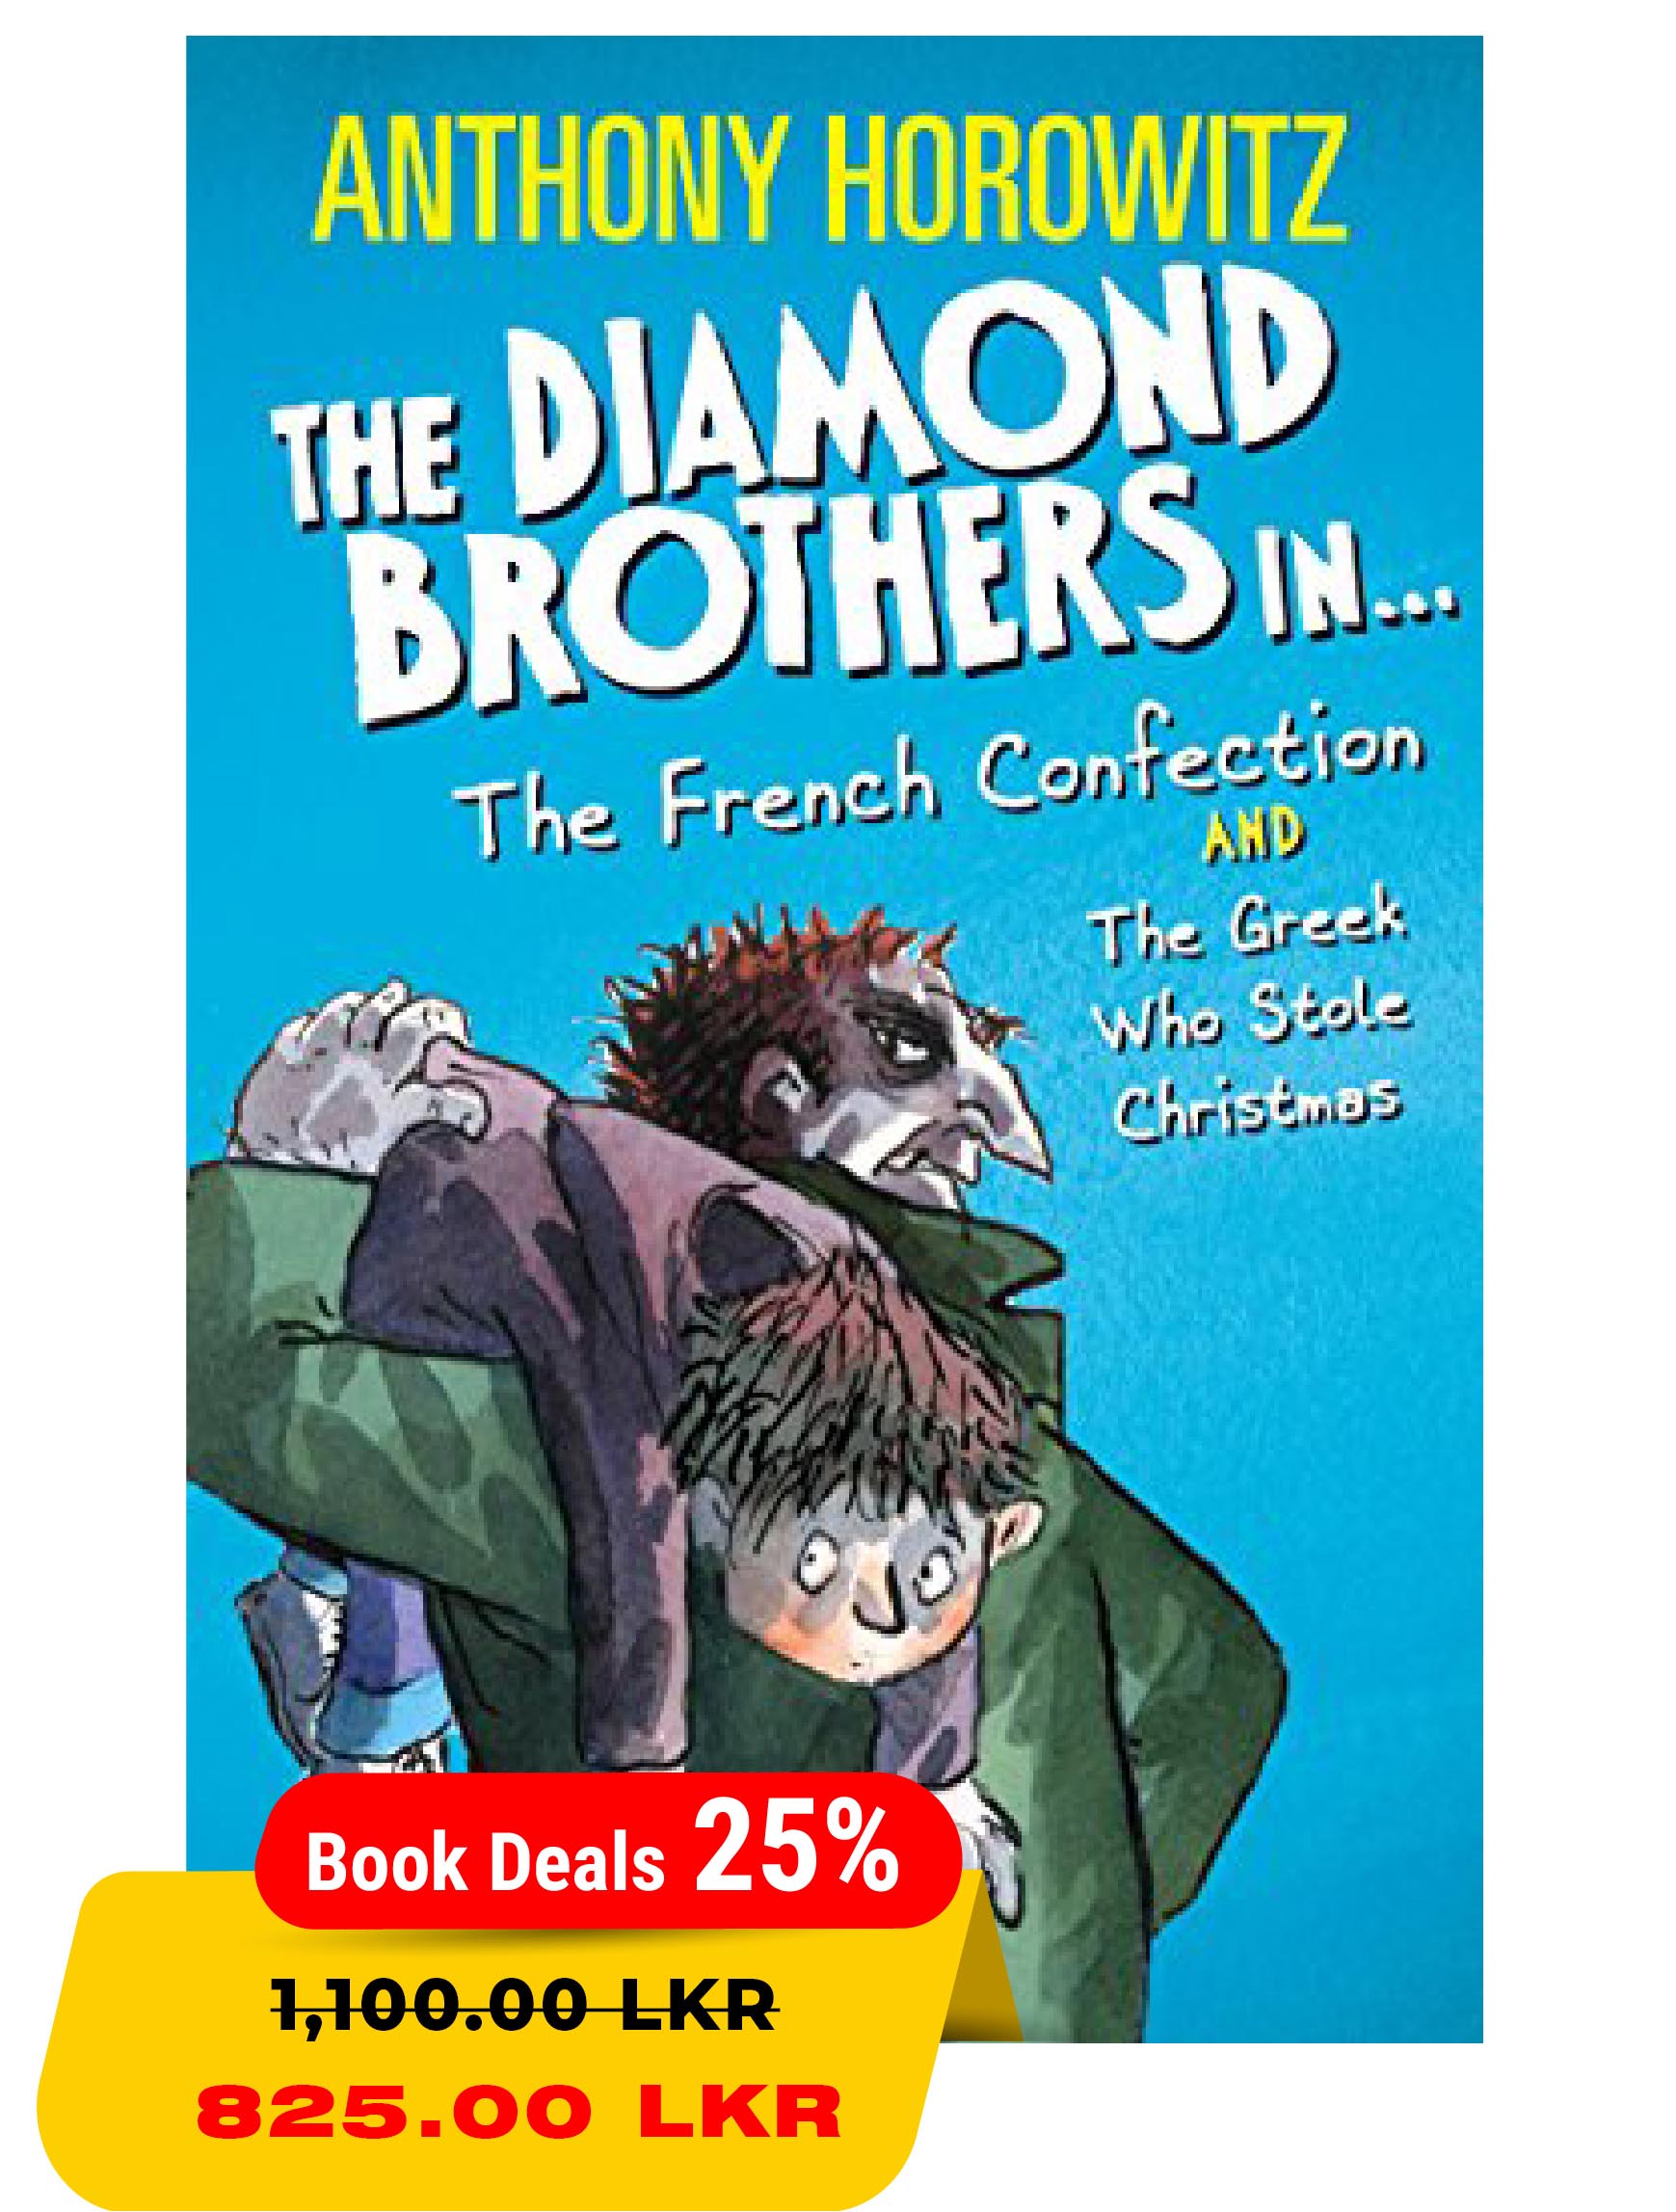 The Diamond Brothers In : The French Confection and The Greek Who Stole Christmas